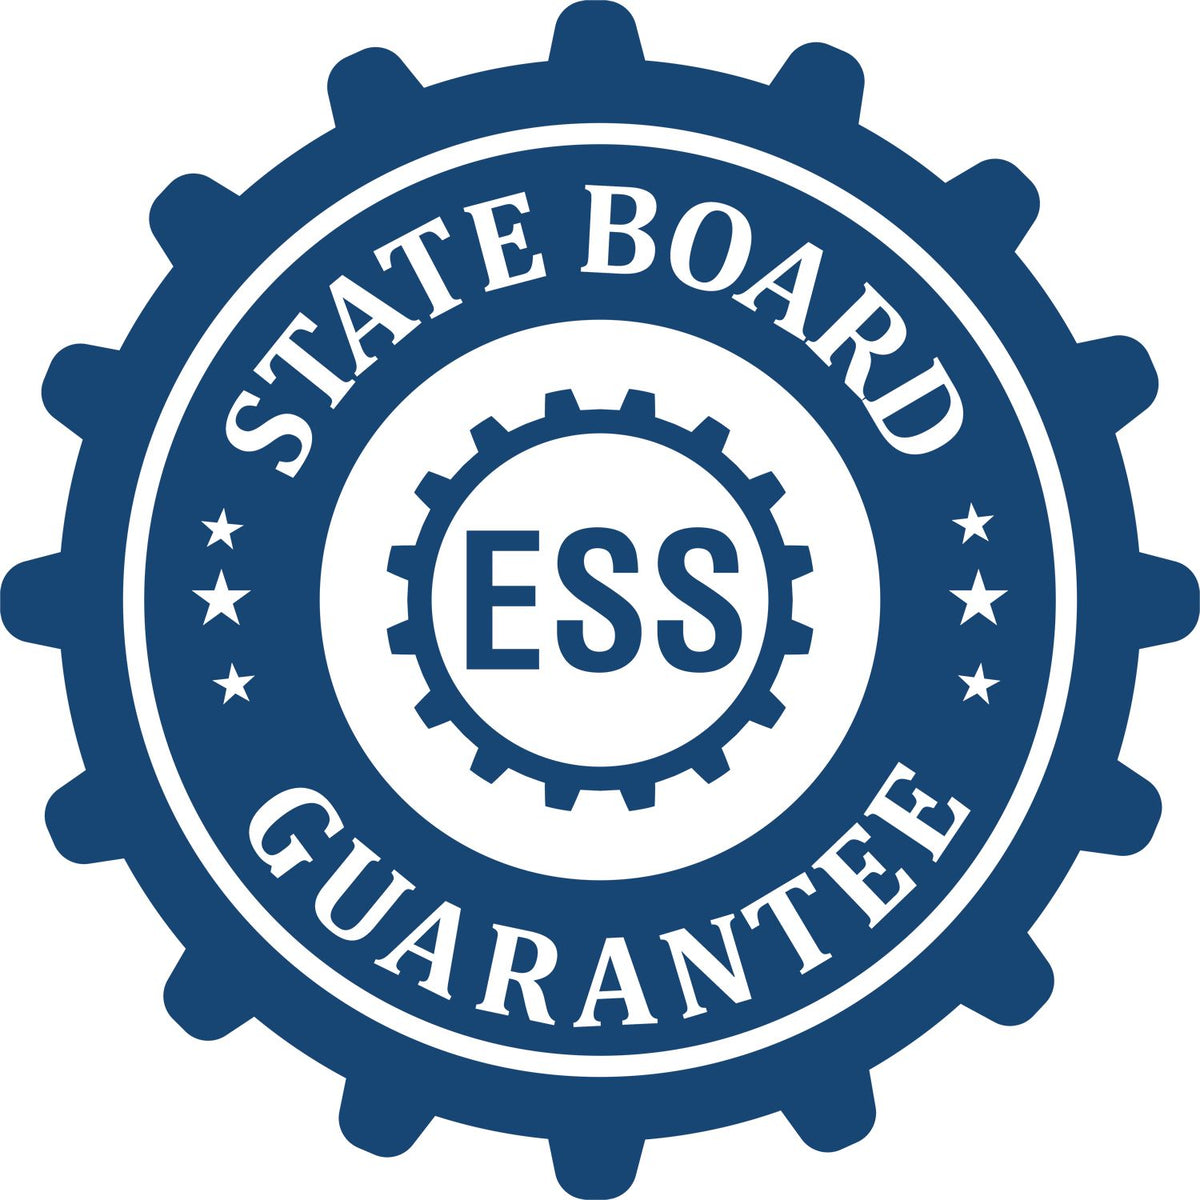 An emblem in a gear shape illustrating a state board guarantee for the Utah Landscape Architectural Seal Stamp product.